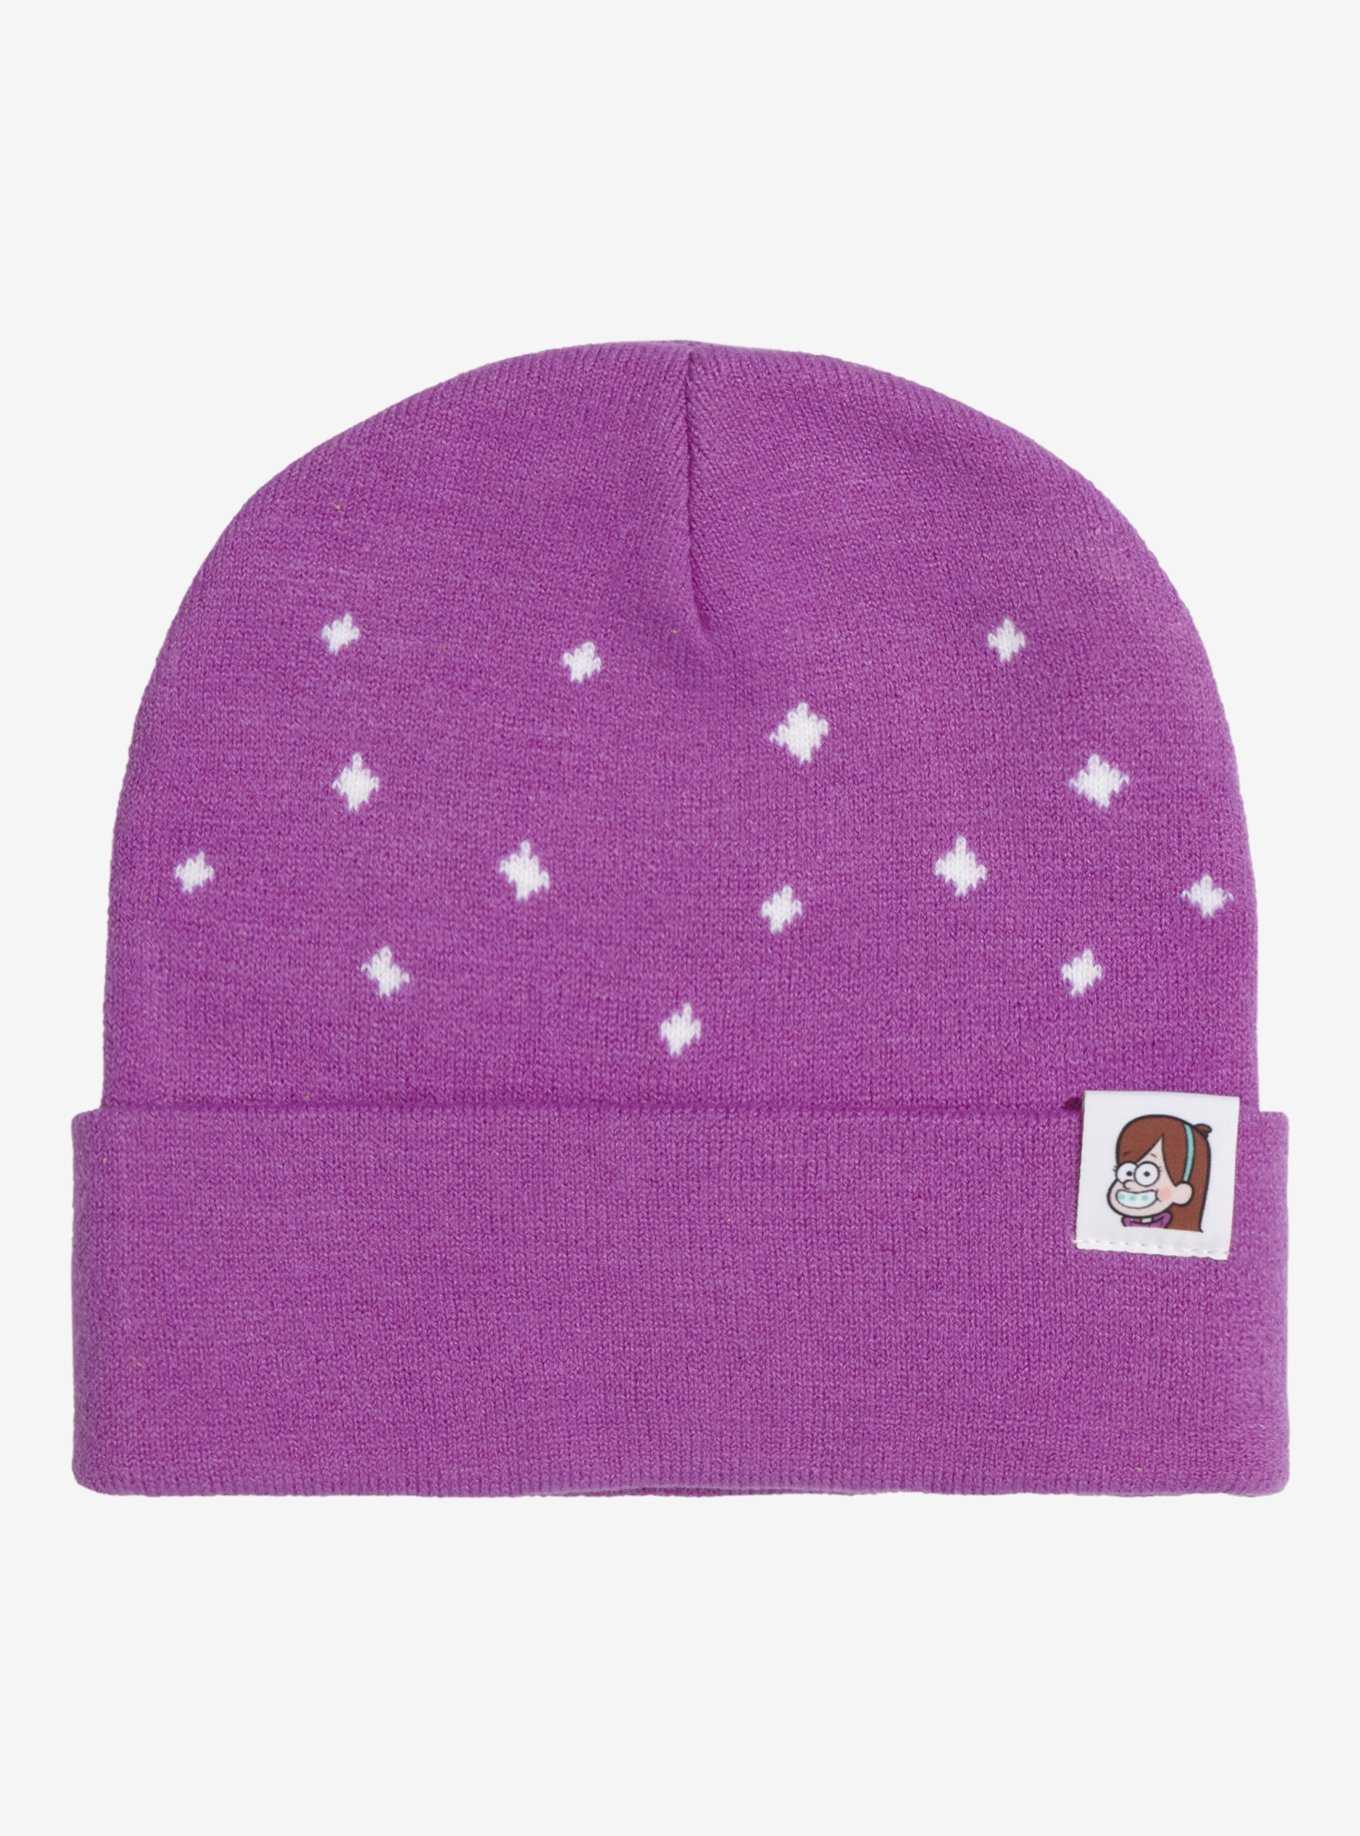 Disney Gravity Falls Mabel Cat Sweater Cuff Beanie - BoxLunch Exclusive, , hi-res